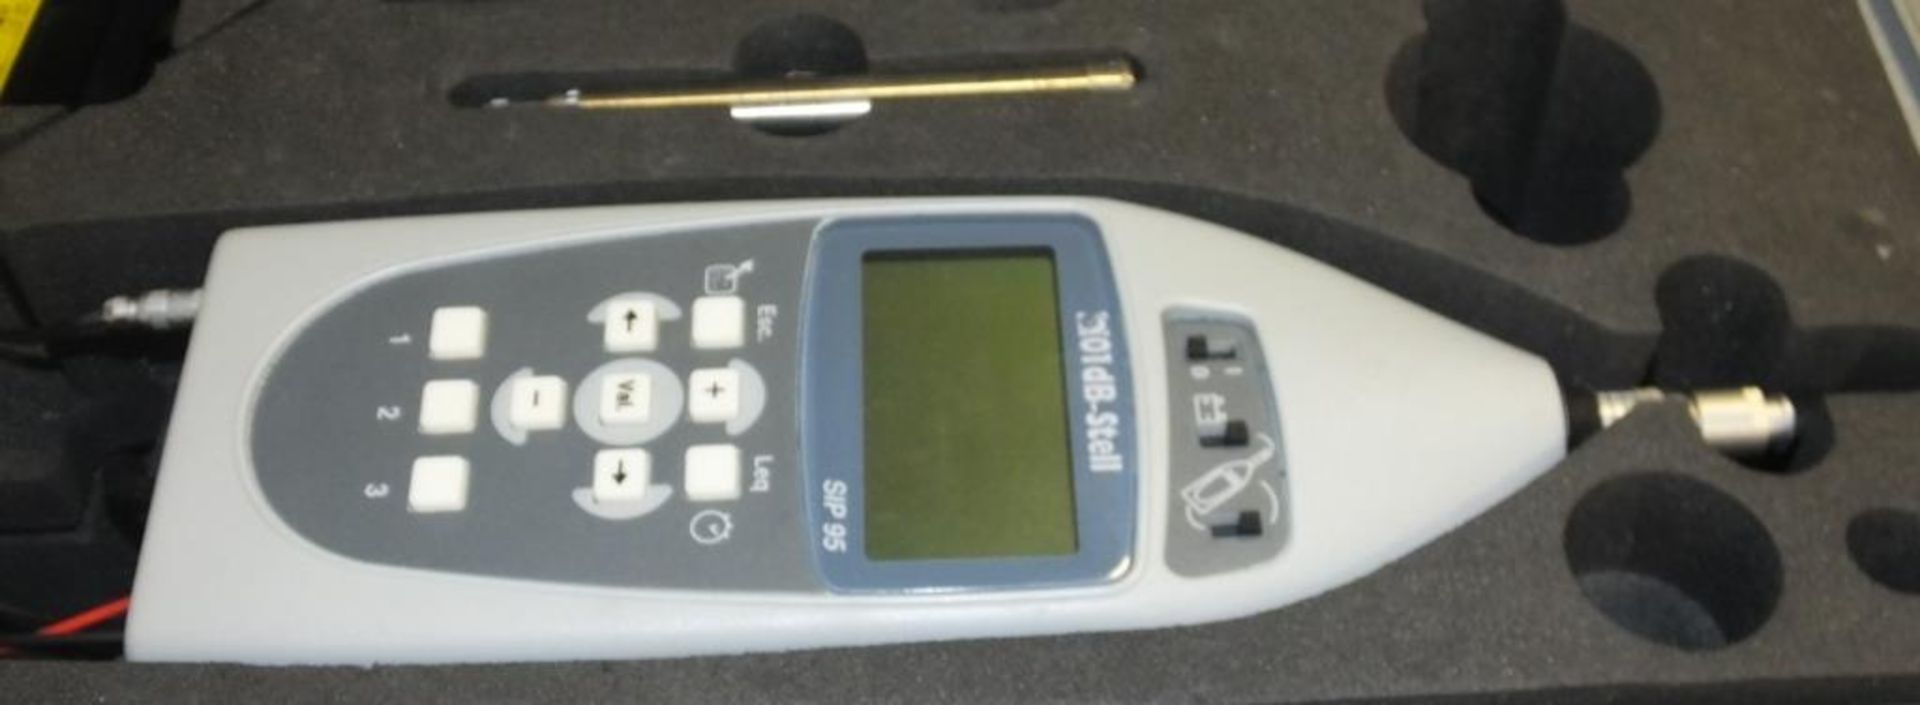 01 DB Stell sound level meter in case - Image 2 of 3